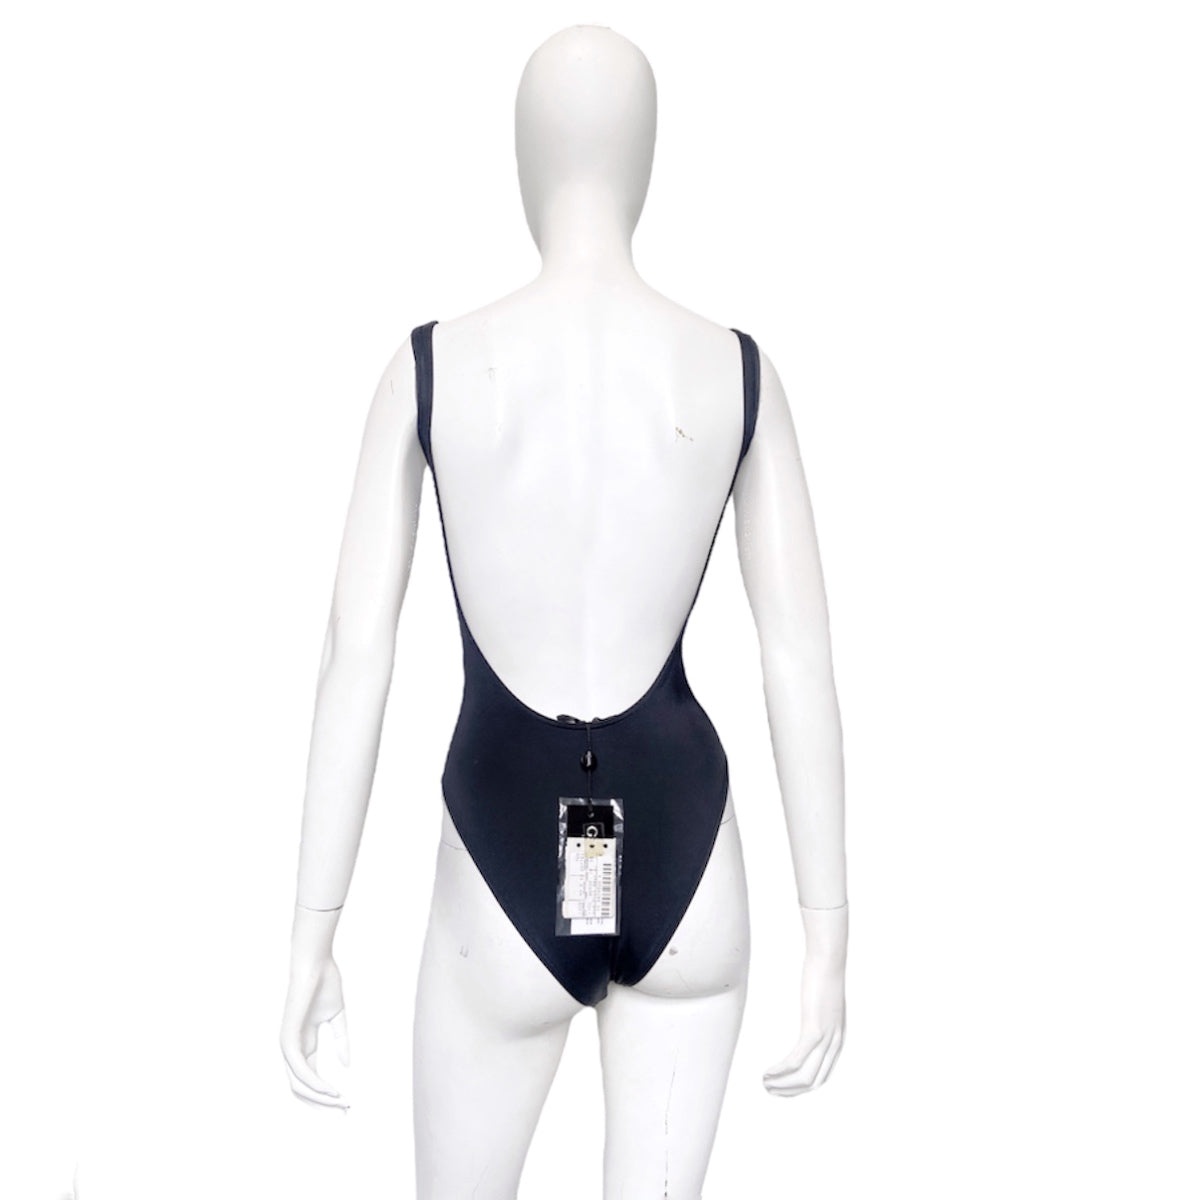 BWNT Gucci Spring 1999 Tom Ford Plunging Backless Navy One-Piece Swimsuit - 3